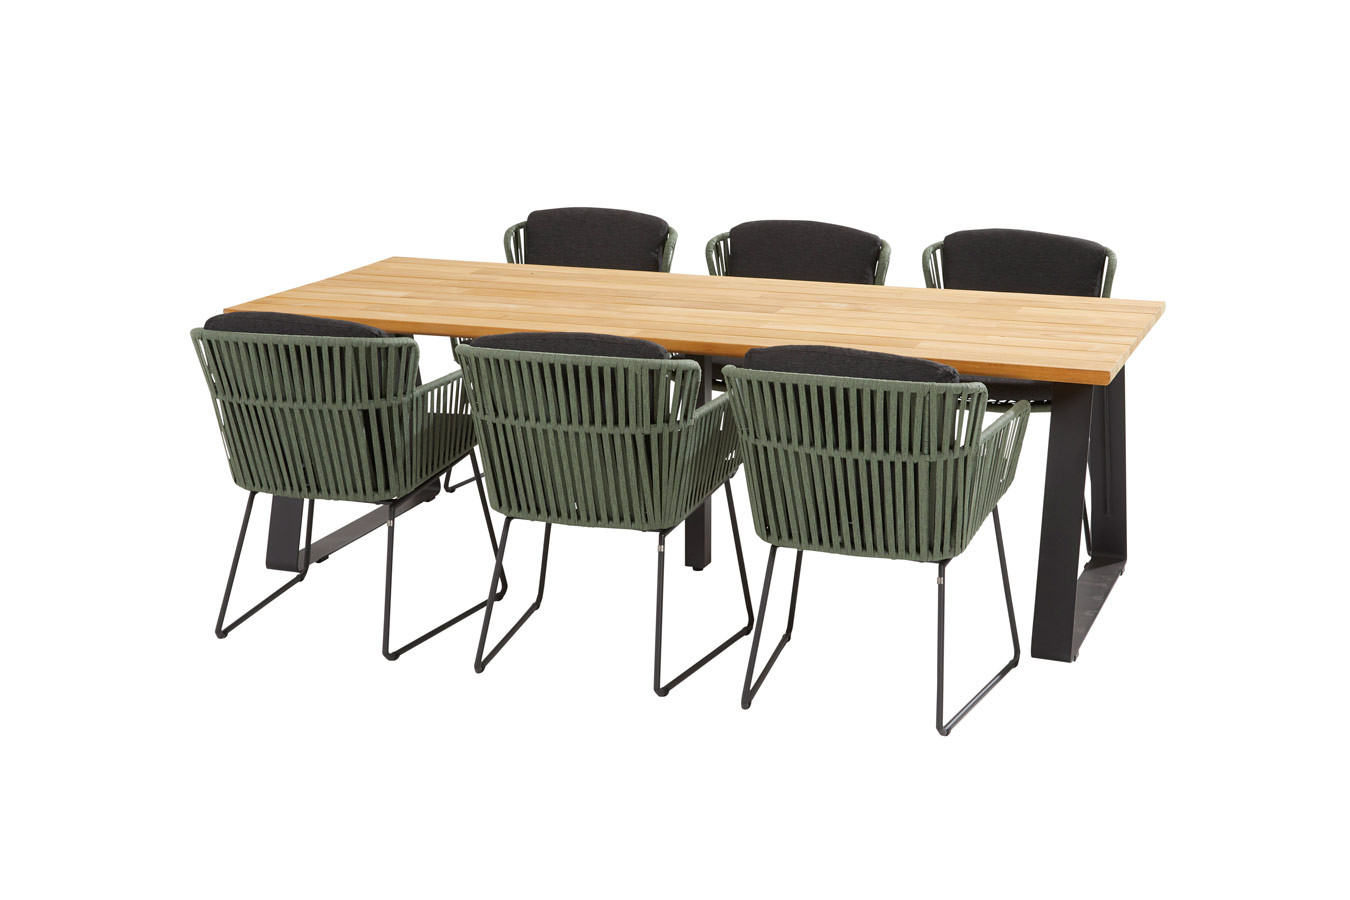 Vitali green dining set with Basso table 240x100 cm